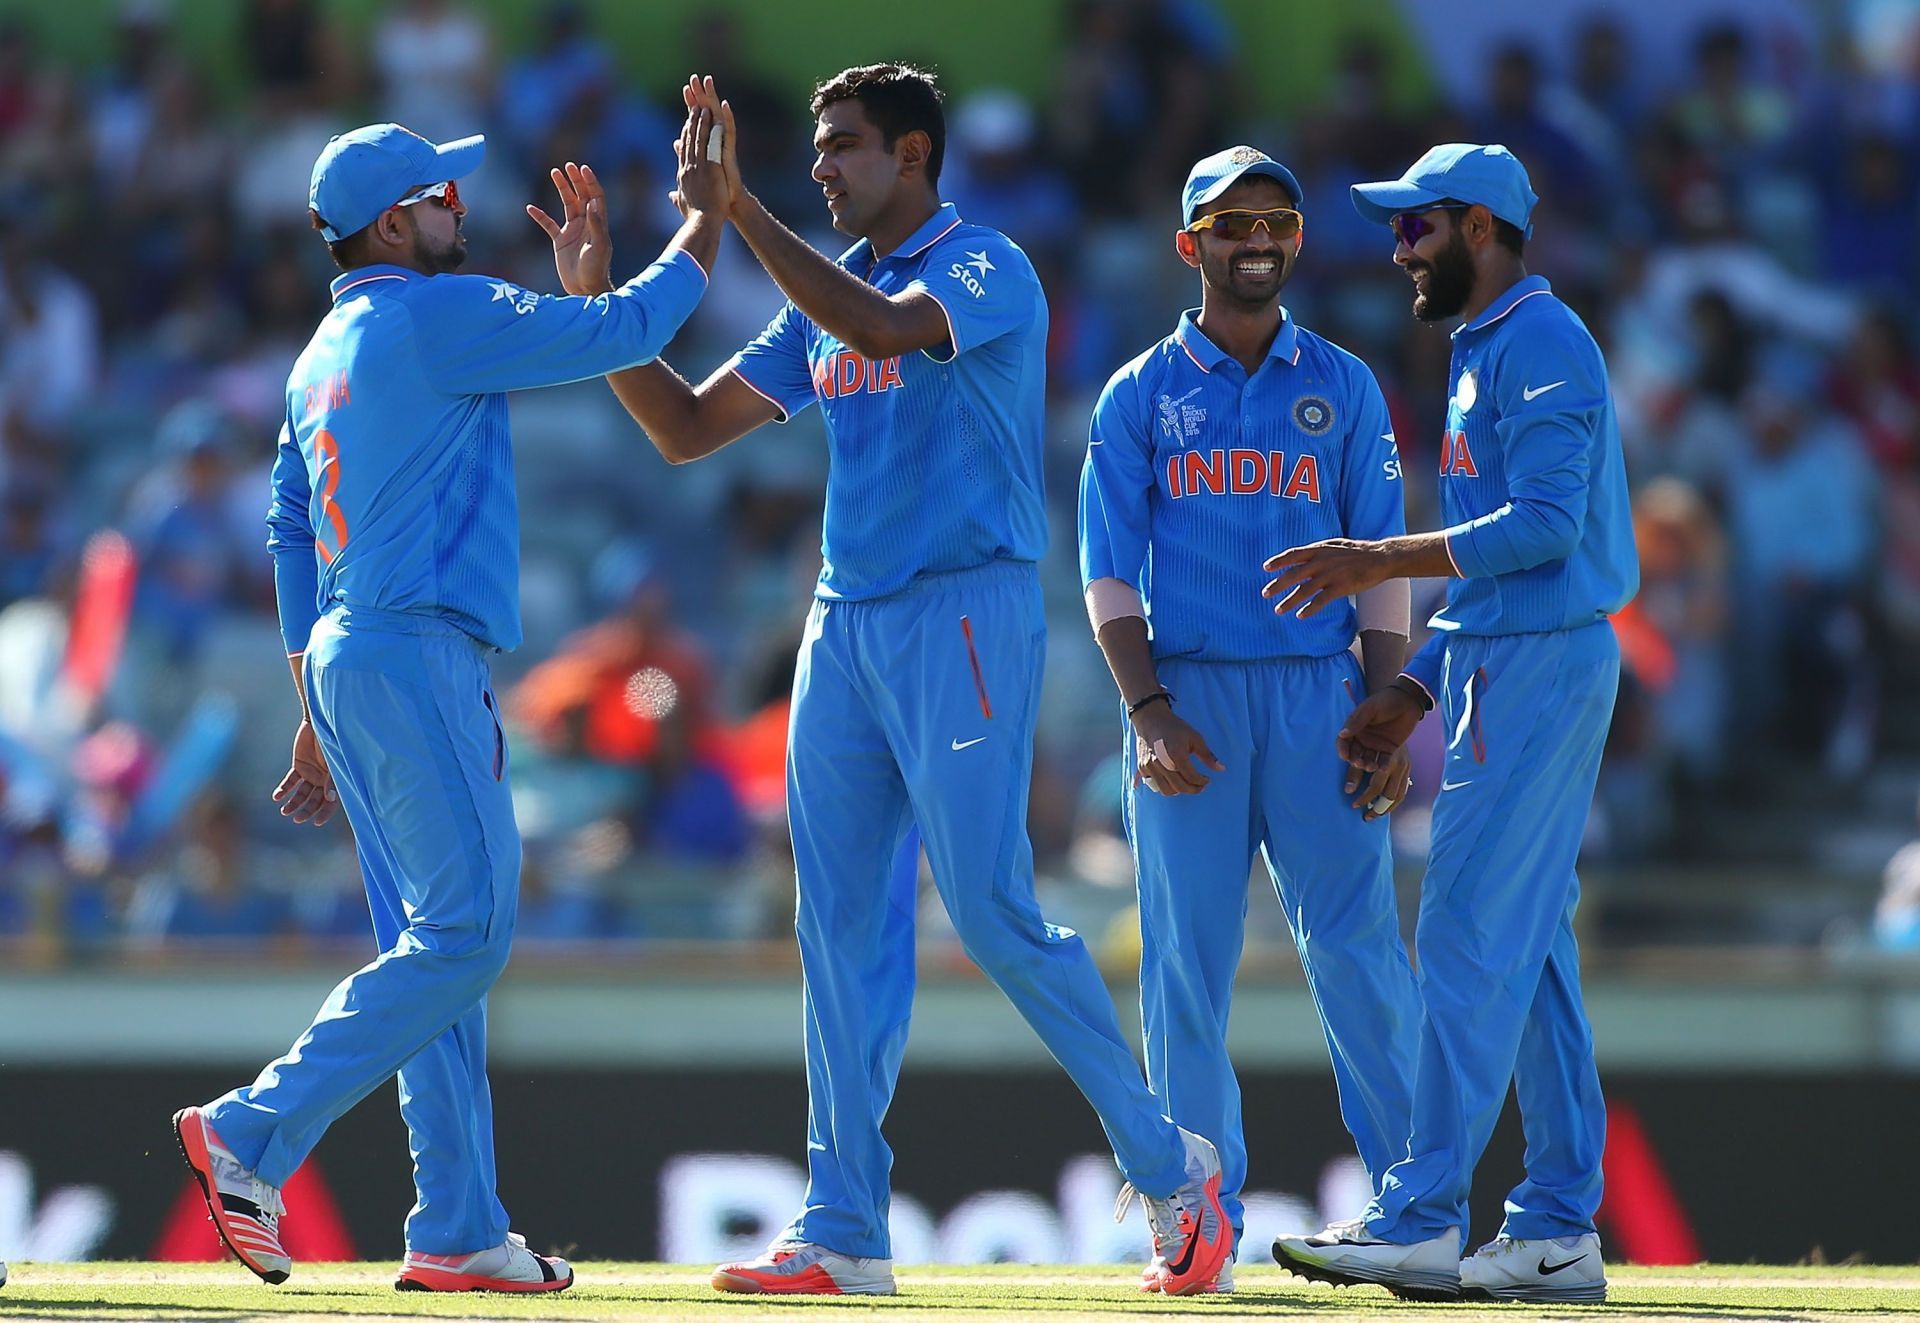 Ashwin picked up four wickets against UAE in the 2015 World Cup